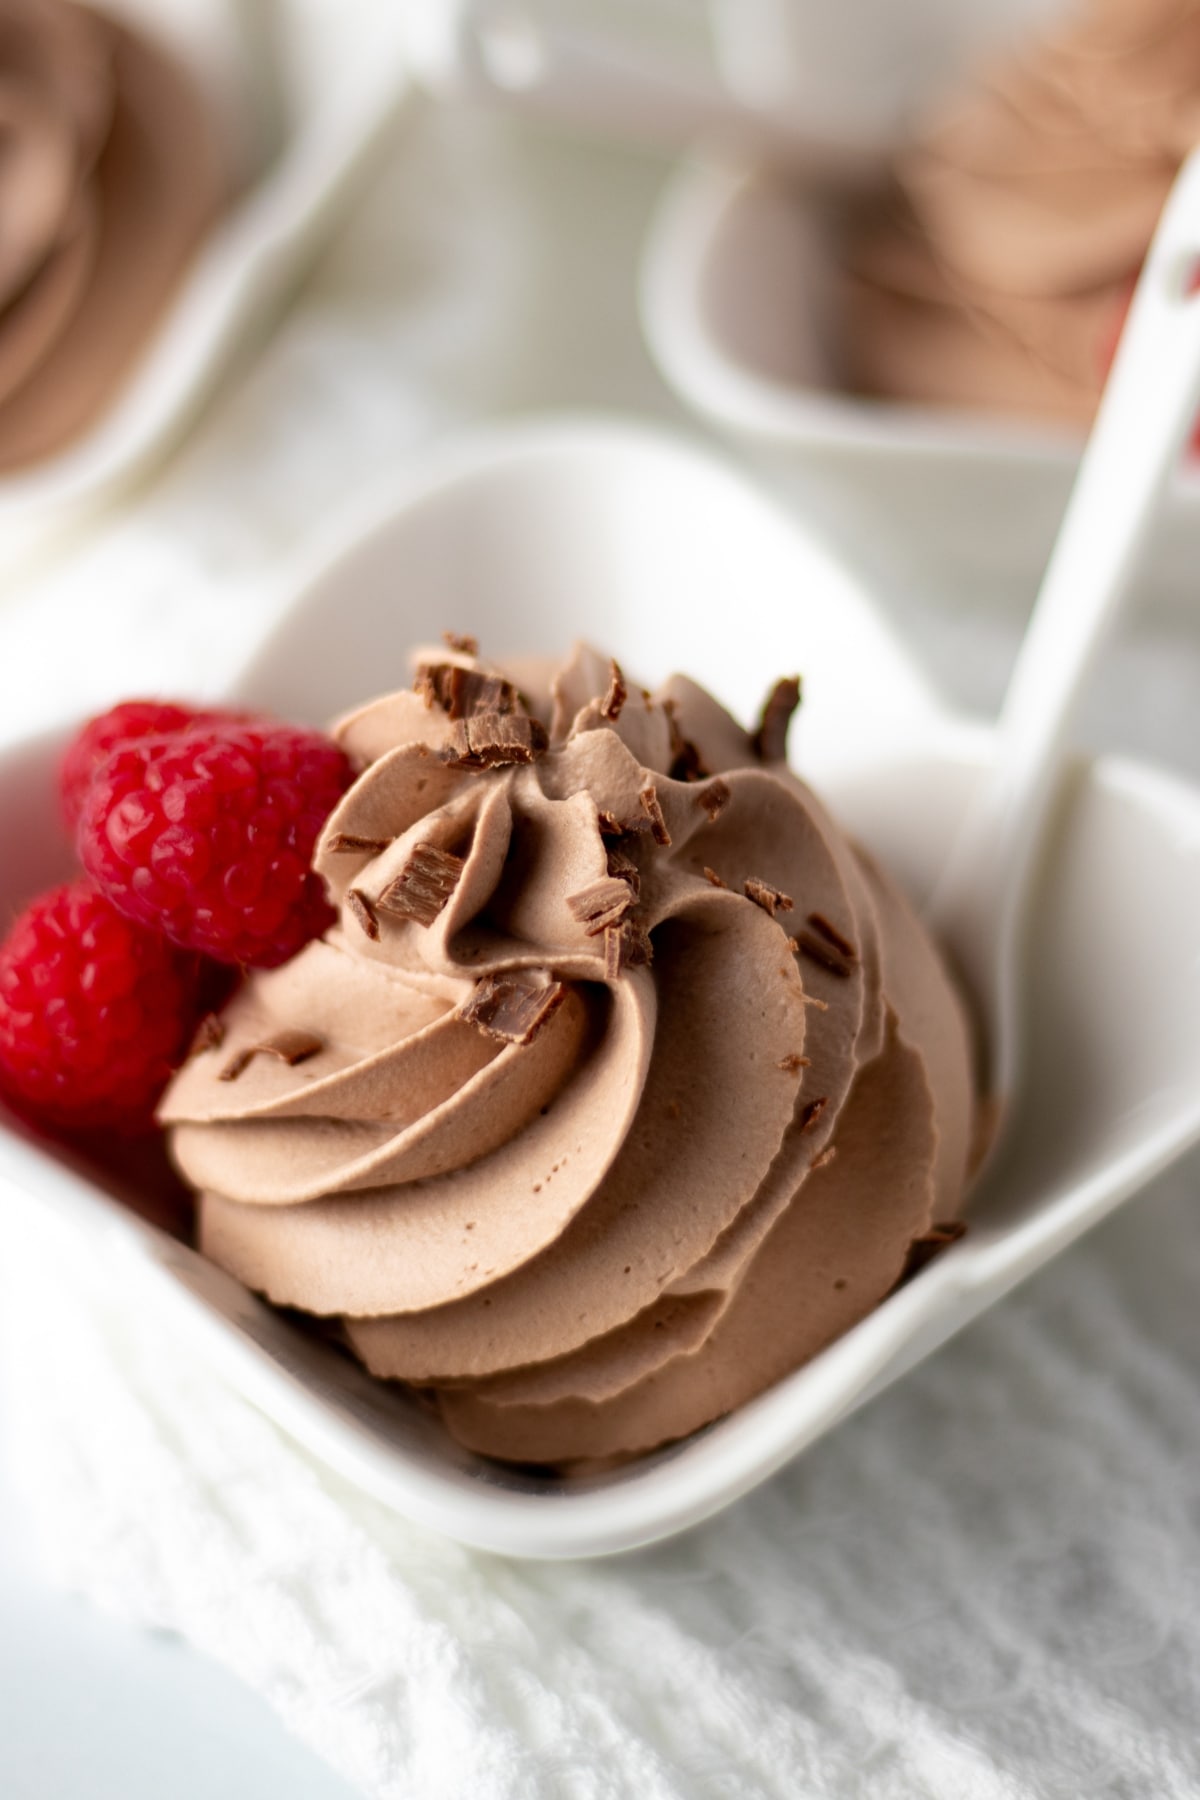 EASY Chocolate Mousse in 5 Minutes